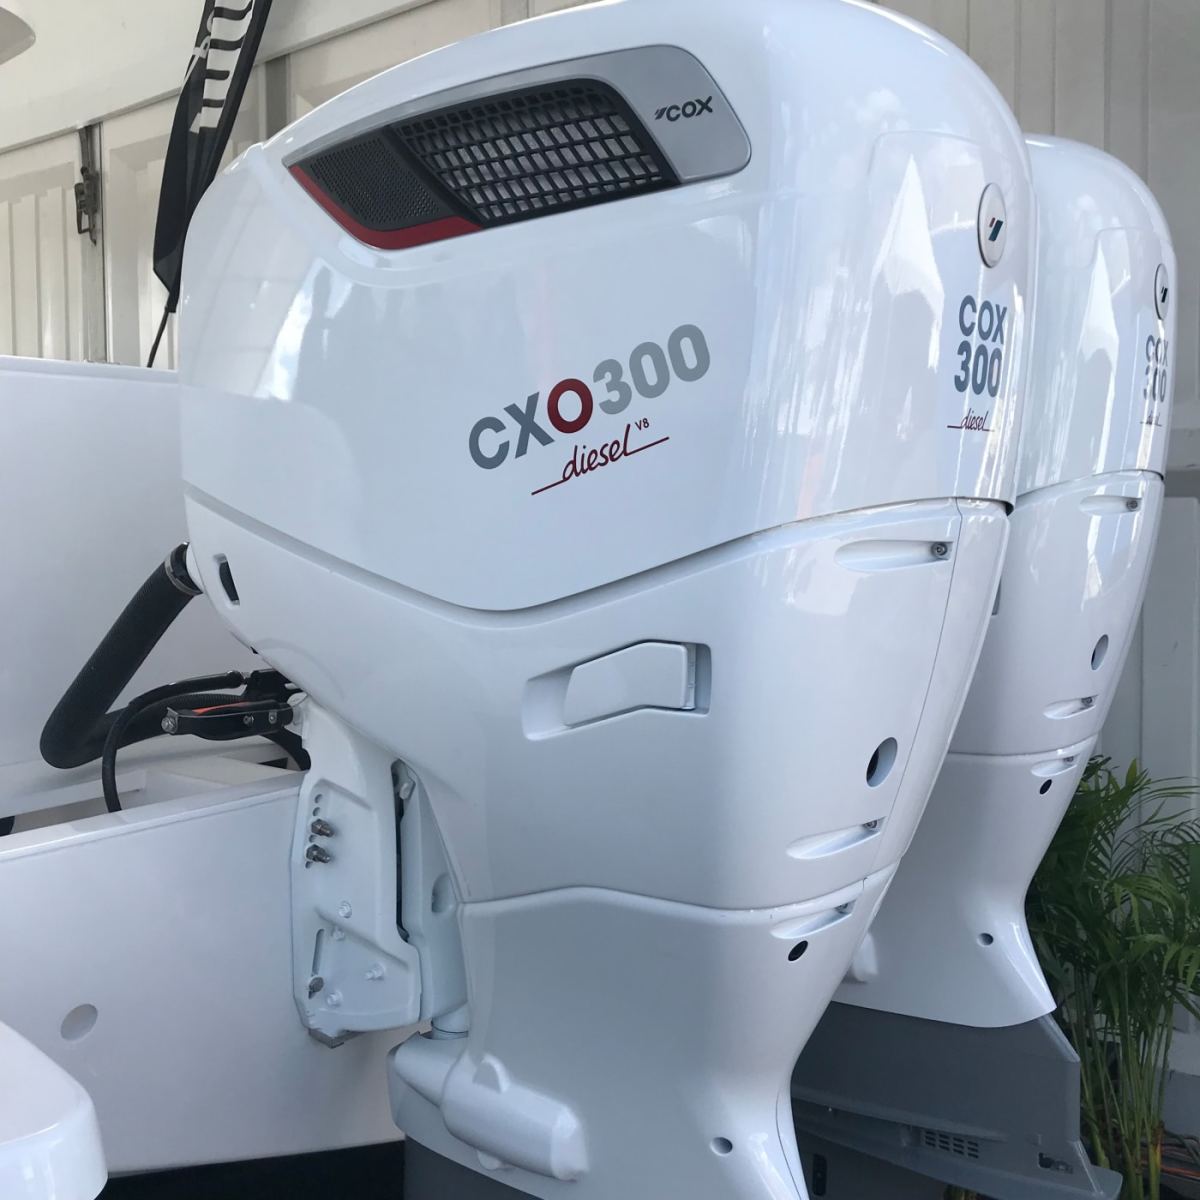 Diesel Outboards by Cox Powertrain spotted at FLIBS 2018 by Soundings magazine